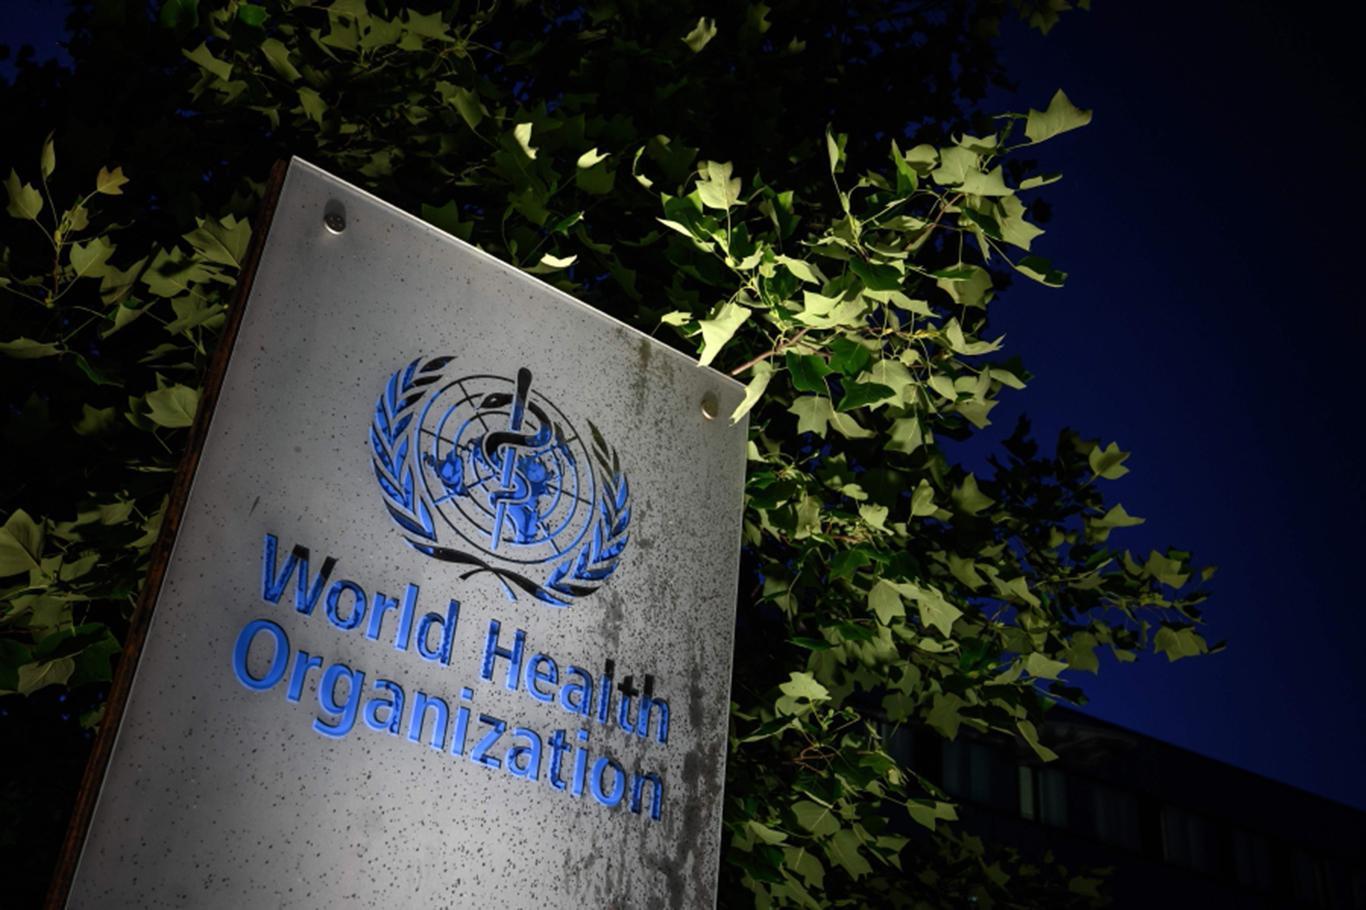 Trump decides to sever ties with the World Health Organization